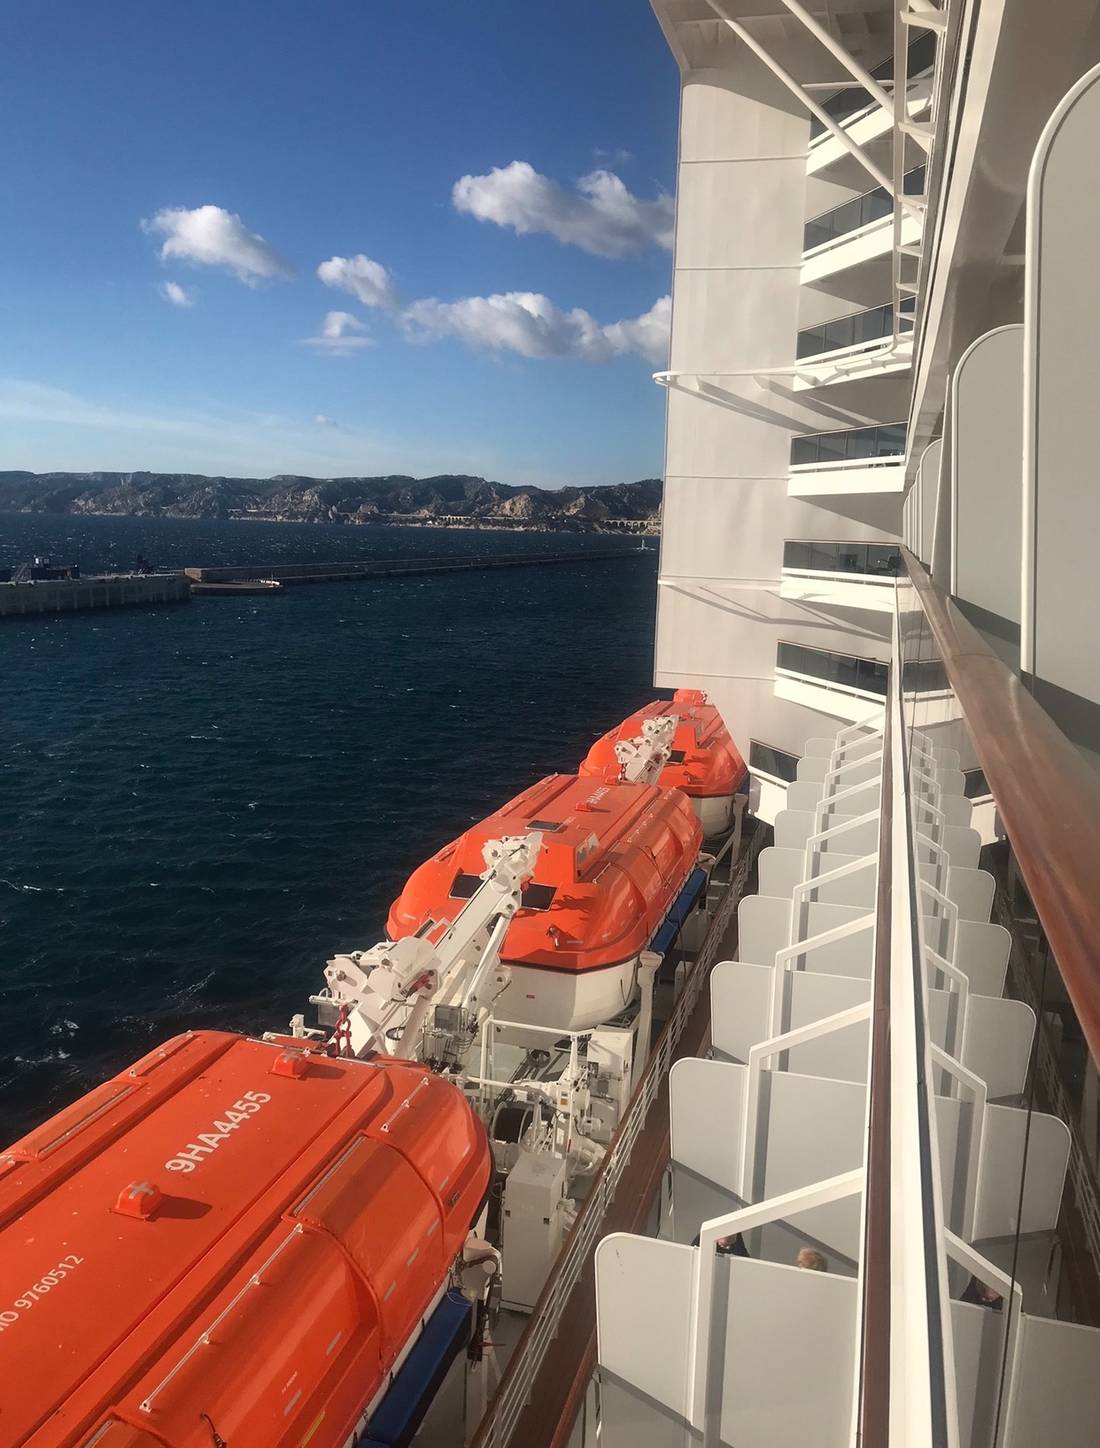 # source : my personal cruise balcony on the last ship